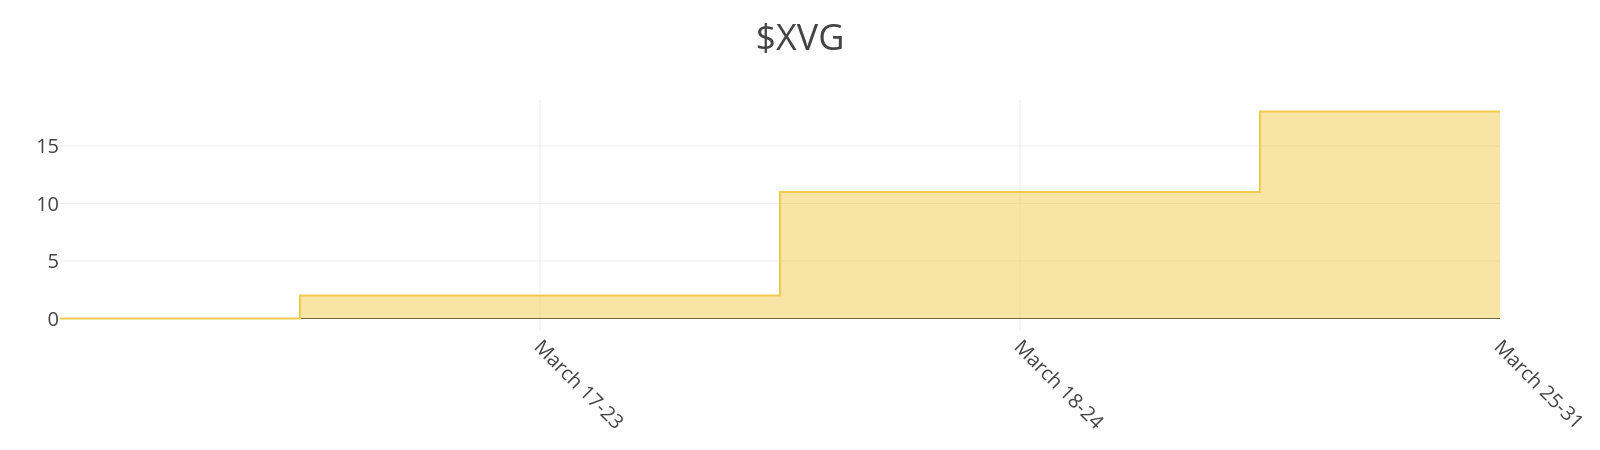 XVG.png